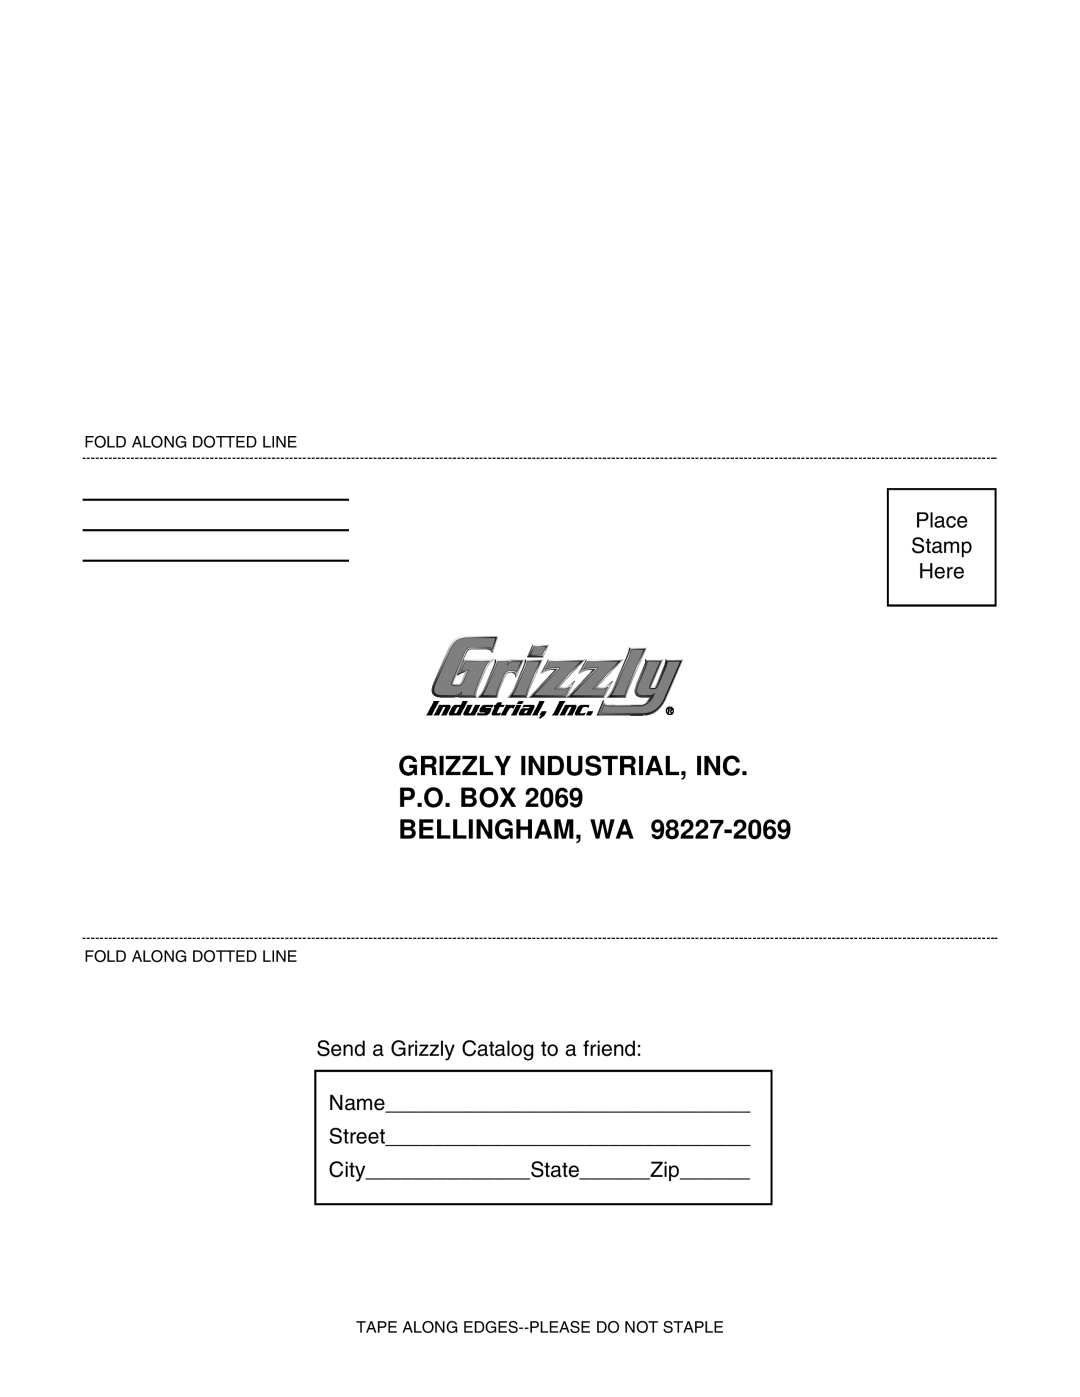 Grizzly G9922 Grizzly Industrial, Inc P.O. Box Bellingham, Wa, Place Stamp Here, Send a Grizzly Catalog to a friend, Name 